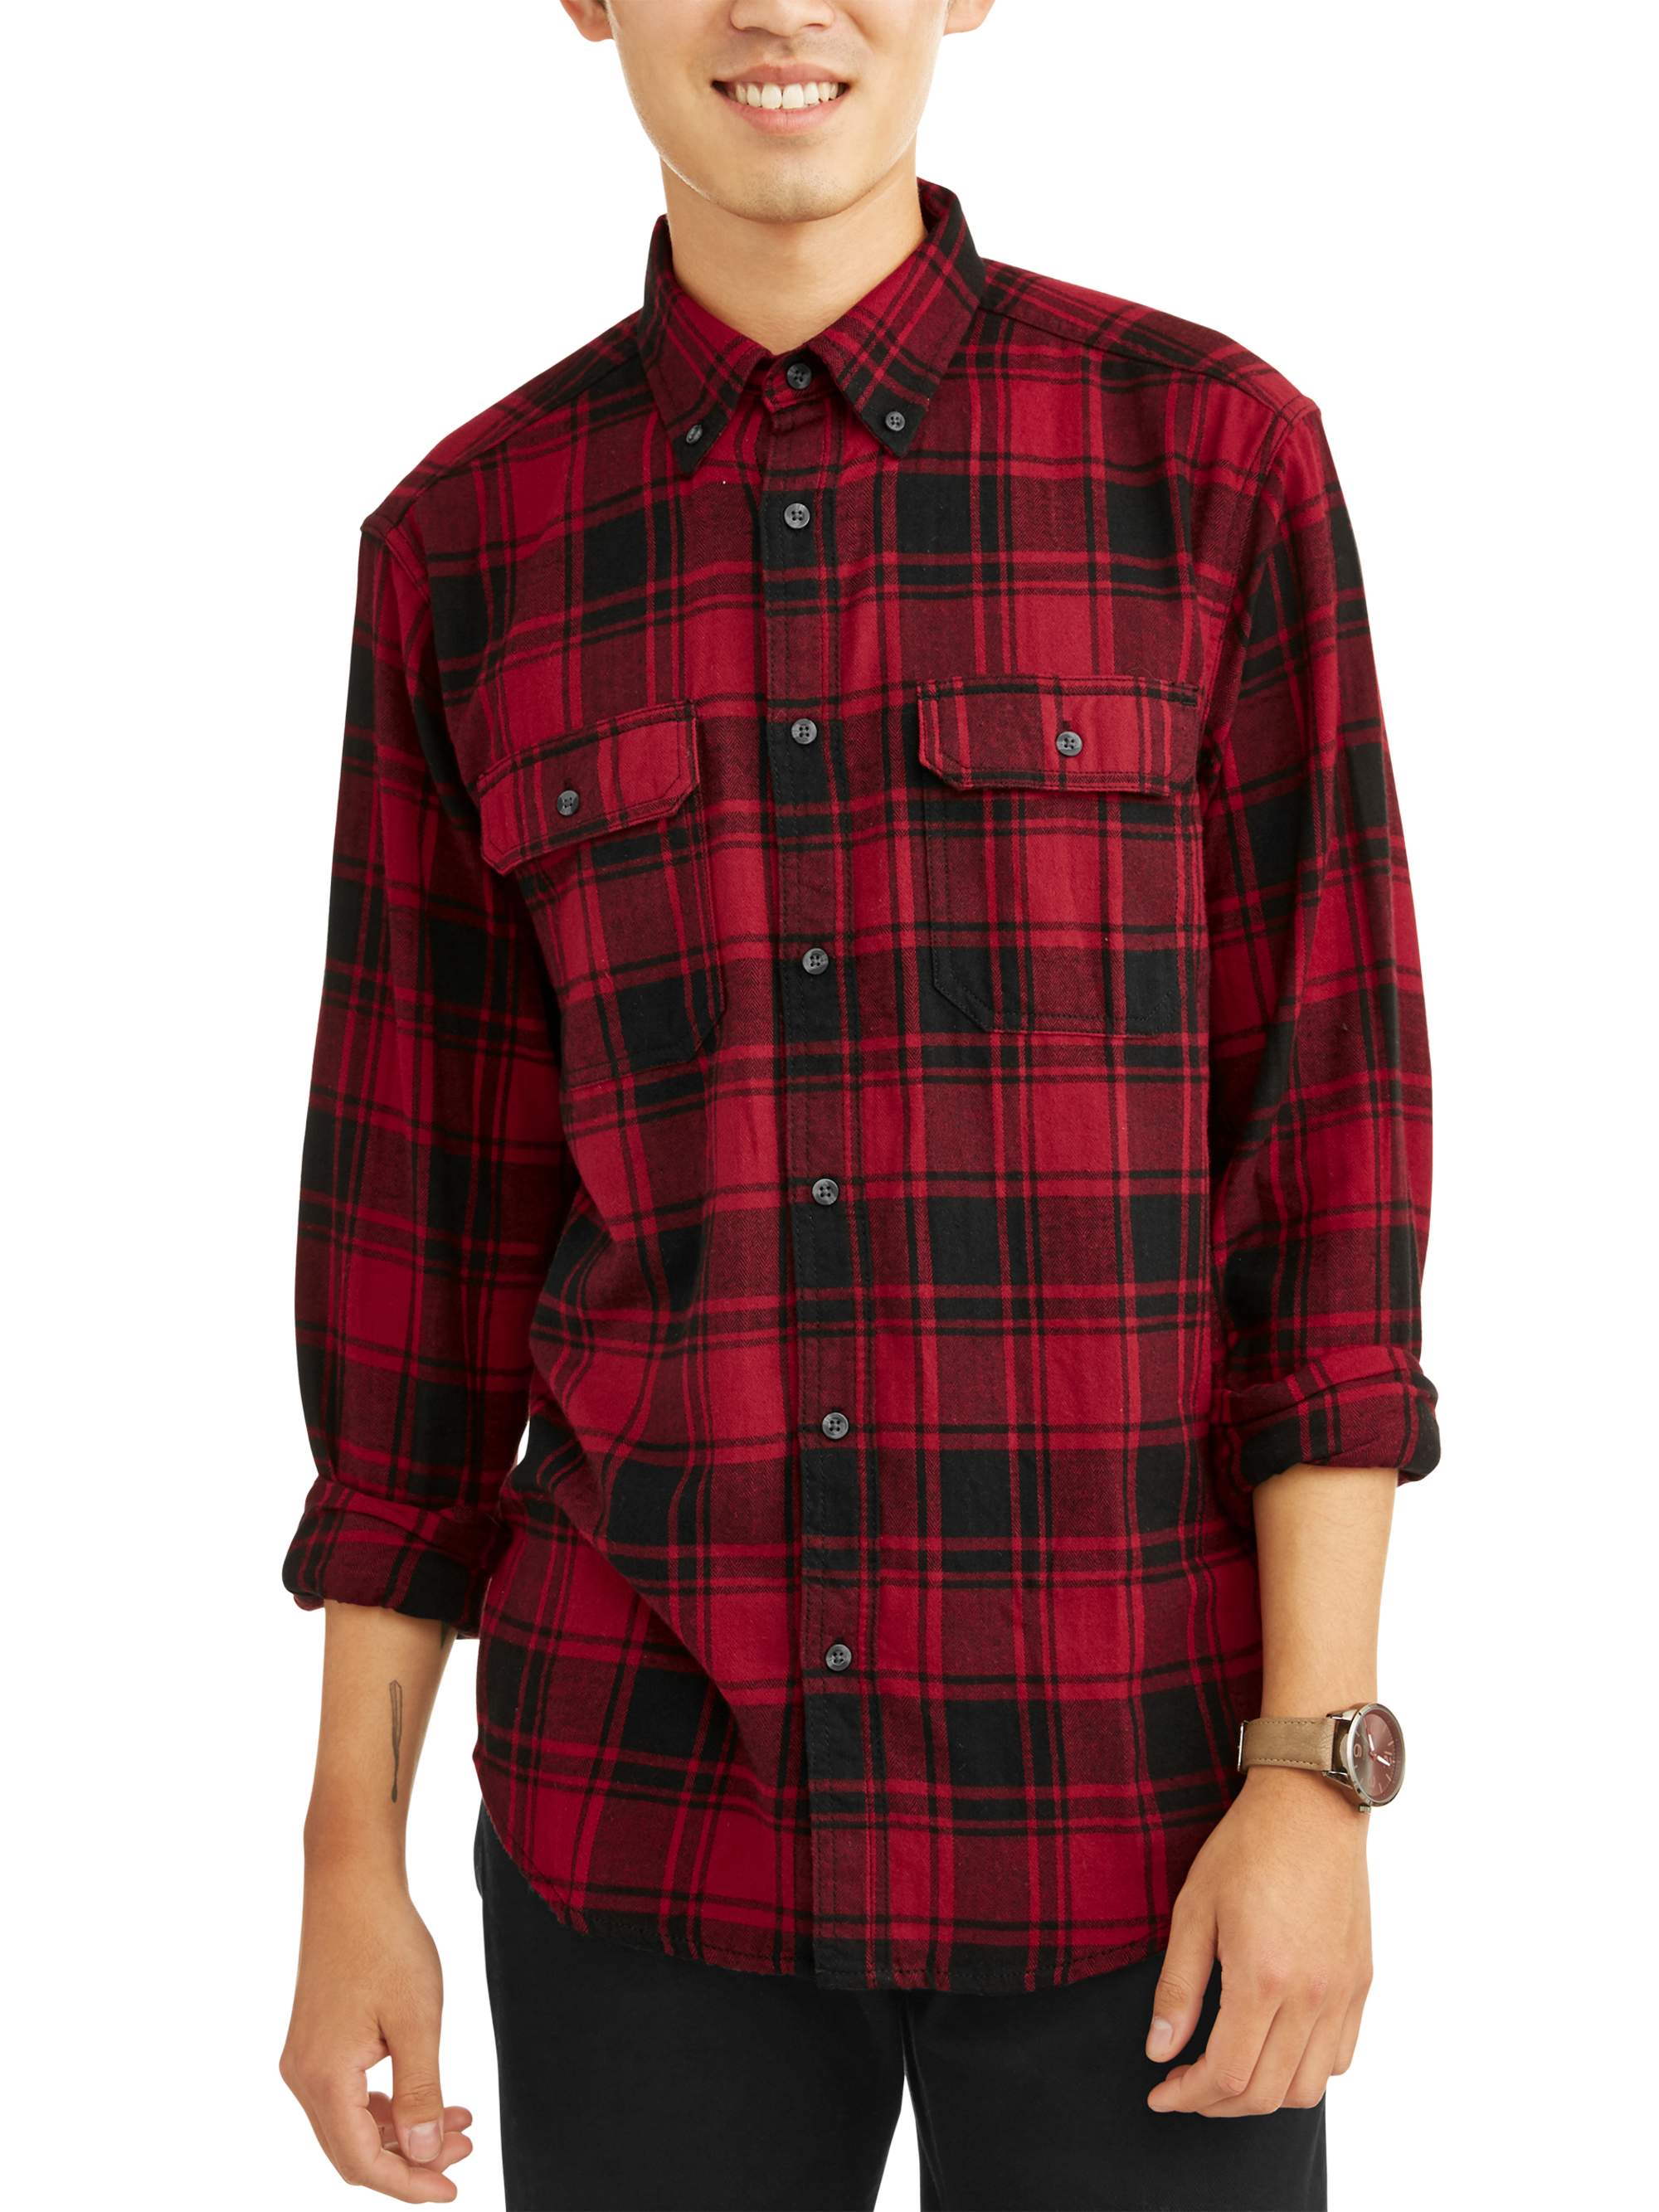 George - George Men's and Big & Tall Long Sleeve Flannel Shirt, up